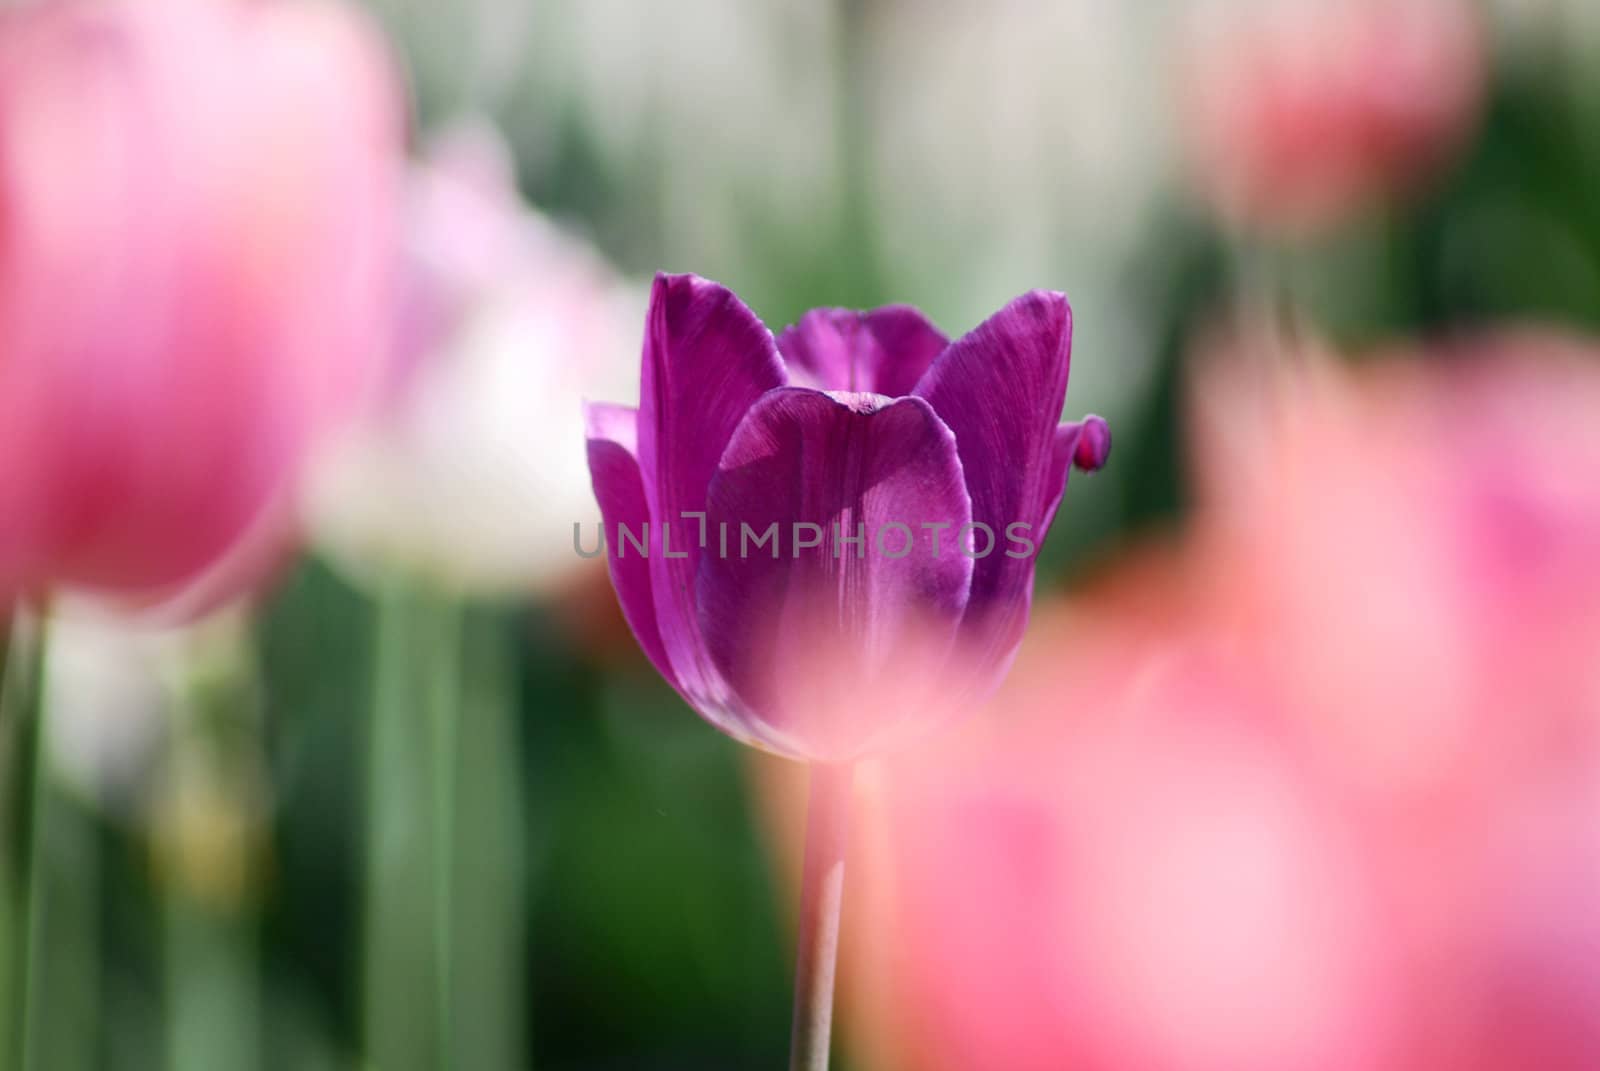 One violet tulip on other tulips in background